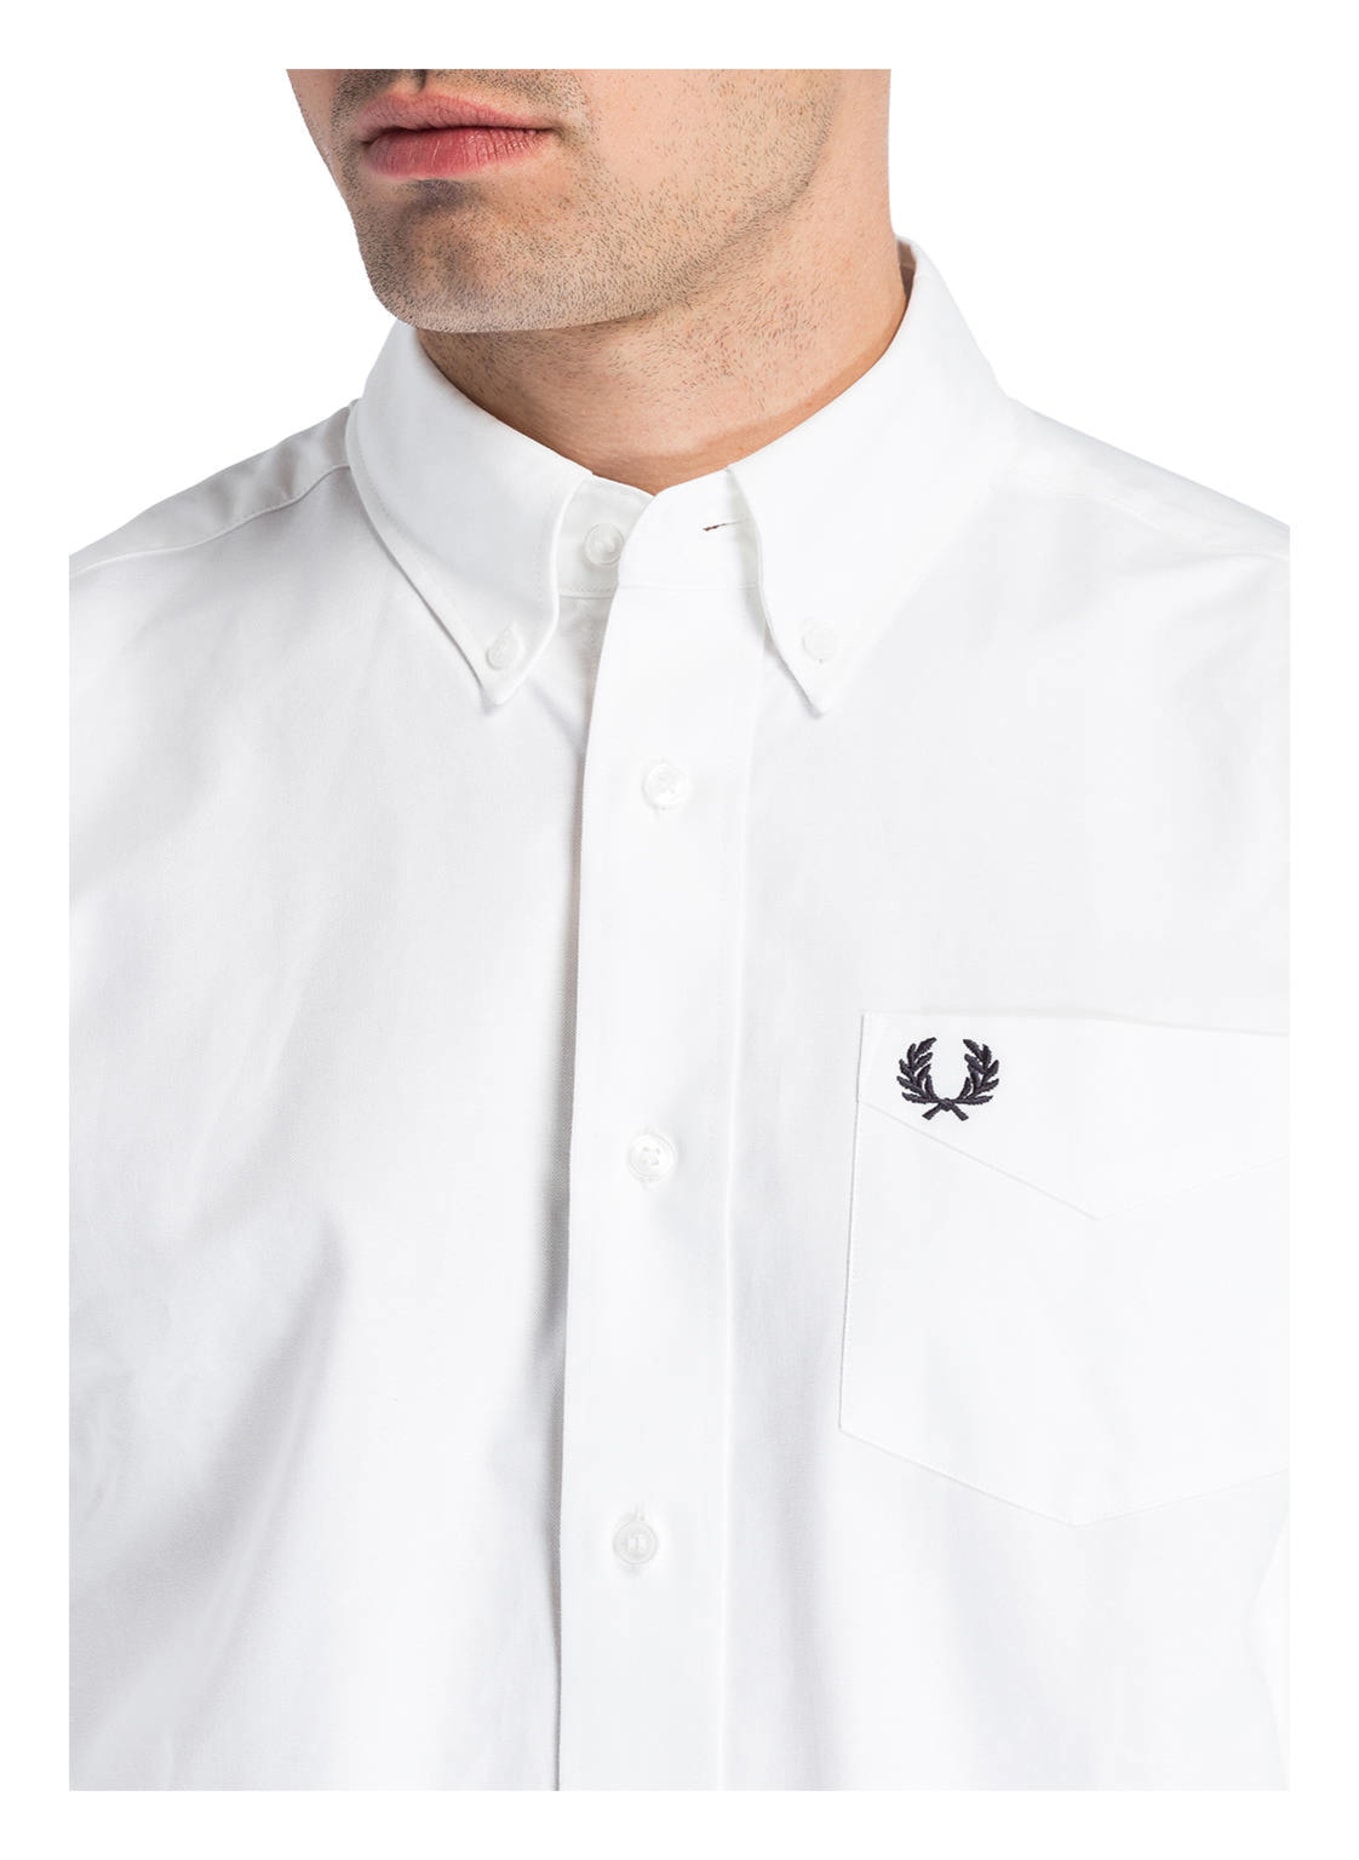 FRED PERRY Hemd Comfort Fit , Farbe: WEISS (Bild 4)